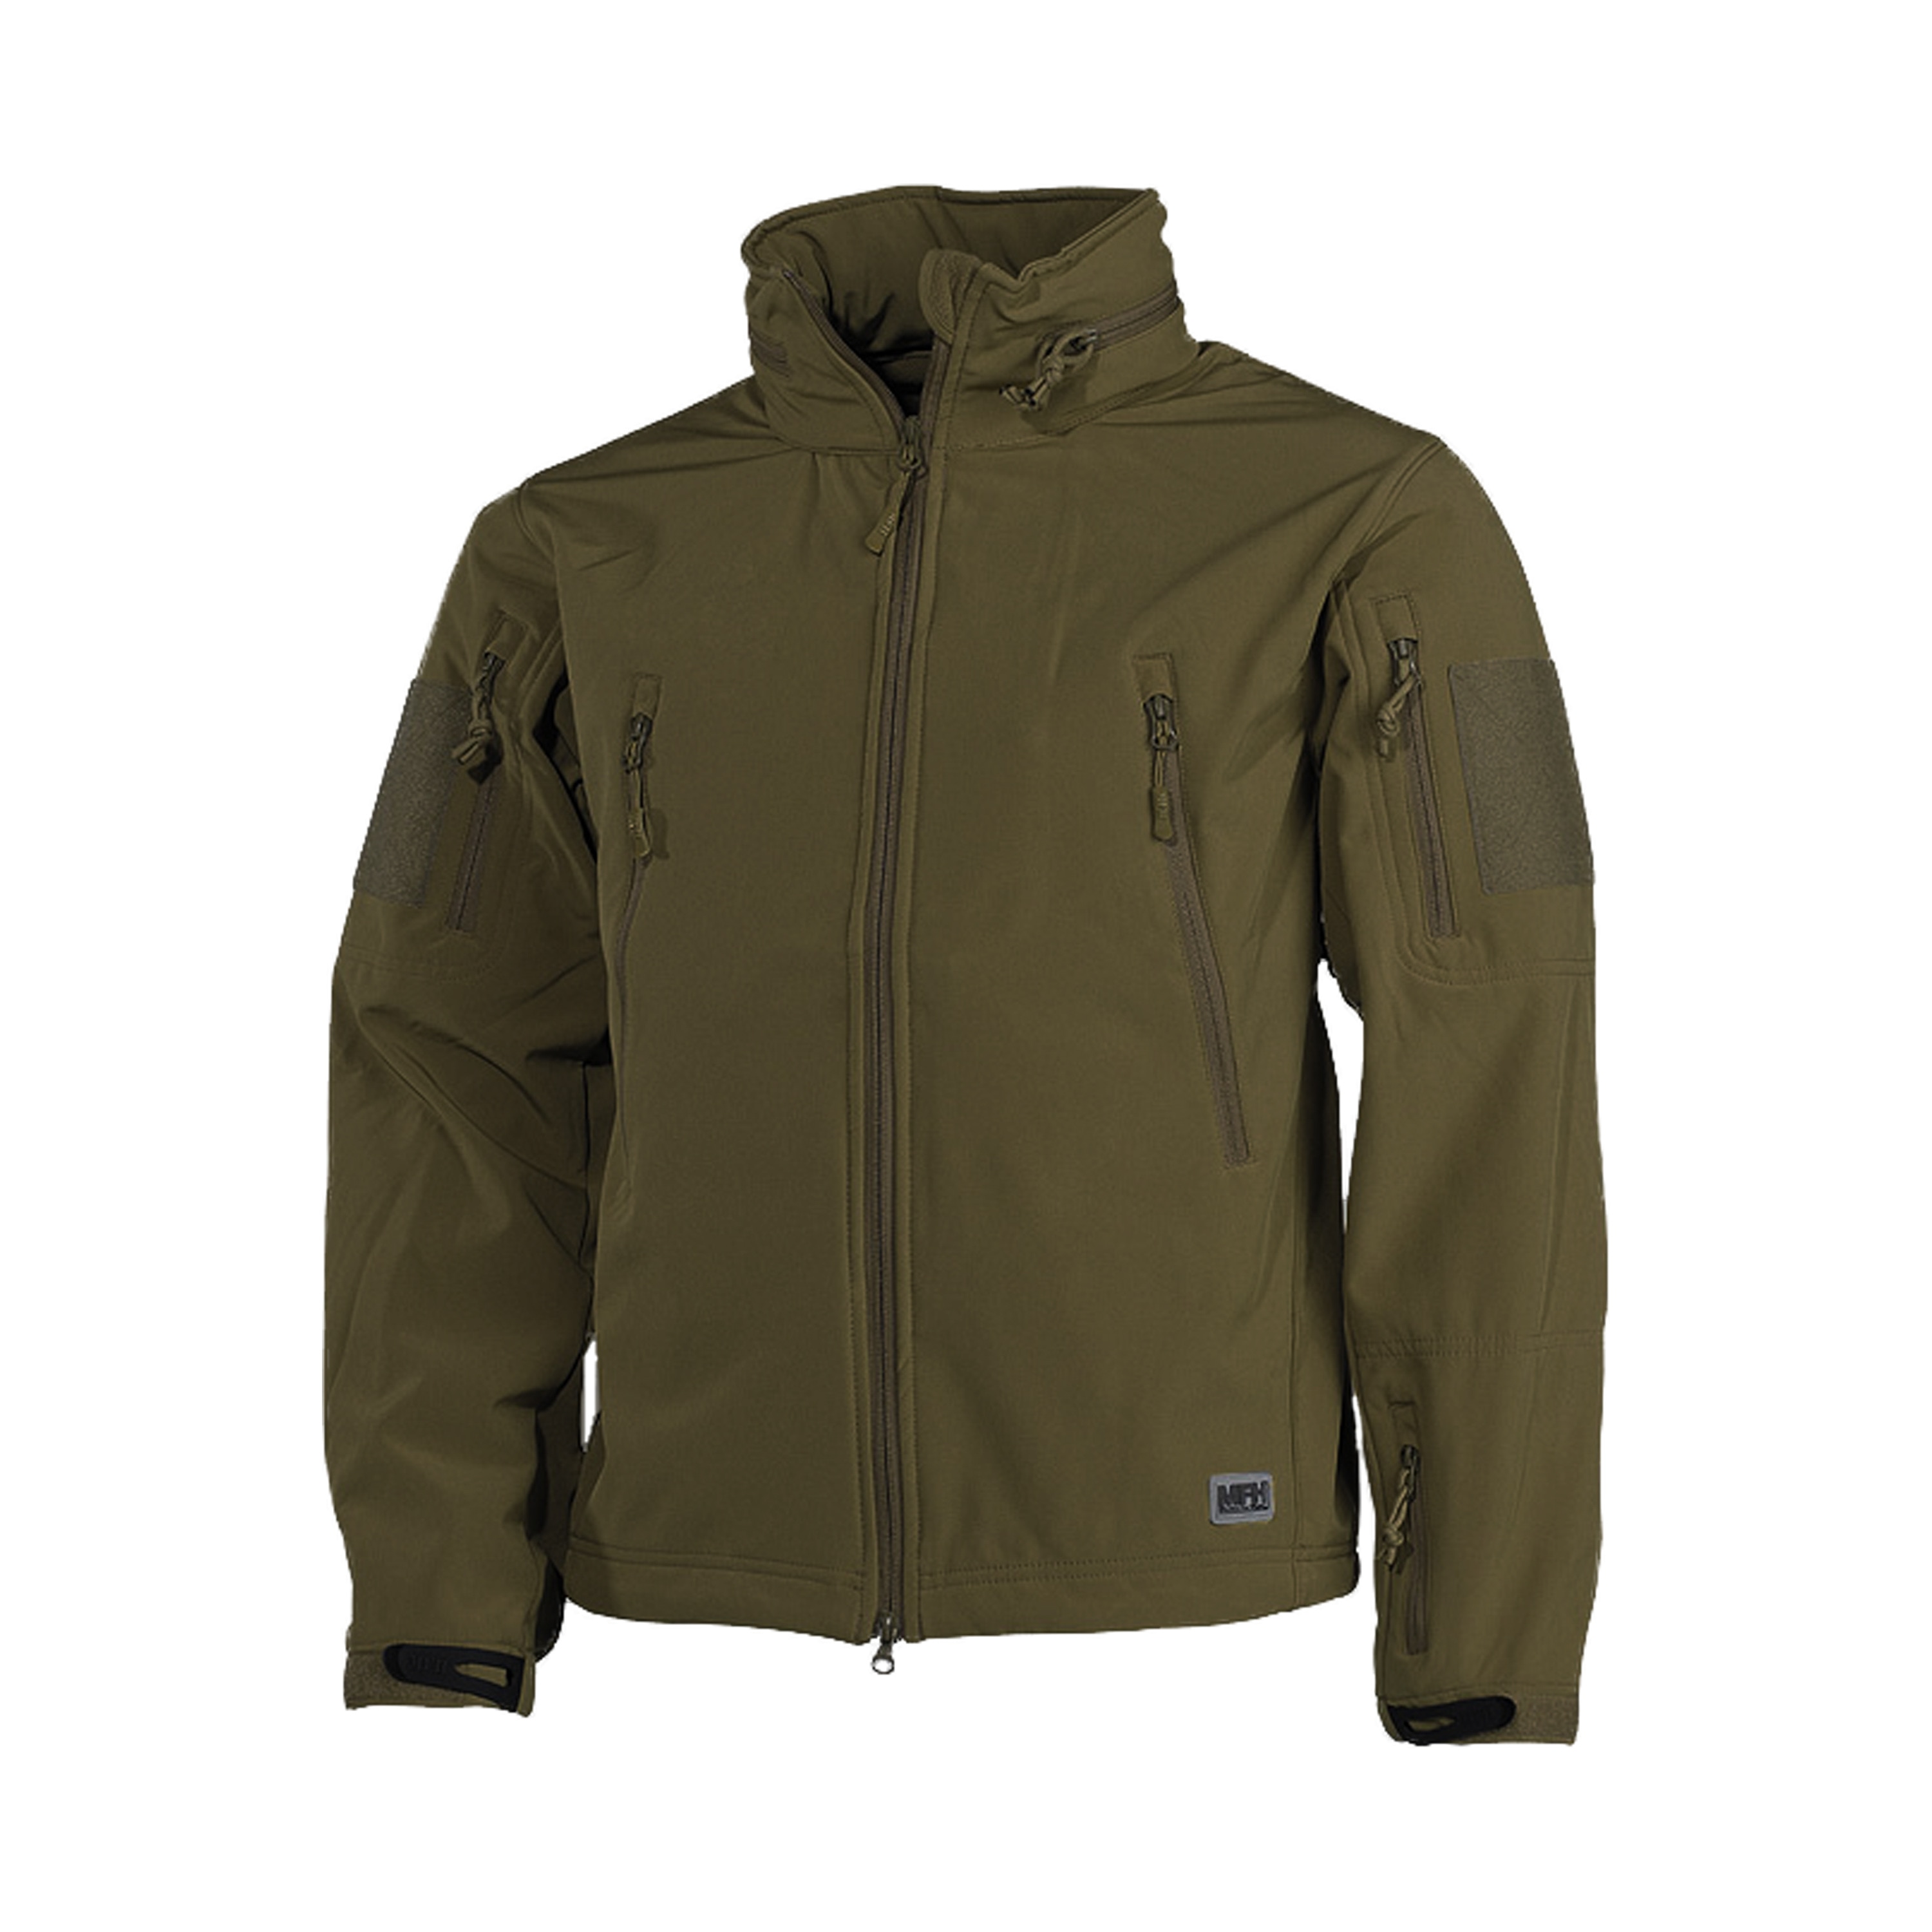 Purchase the Softshell Jacket Scorpion olive by ASMC